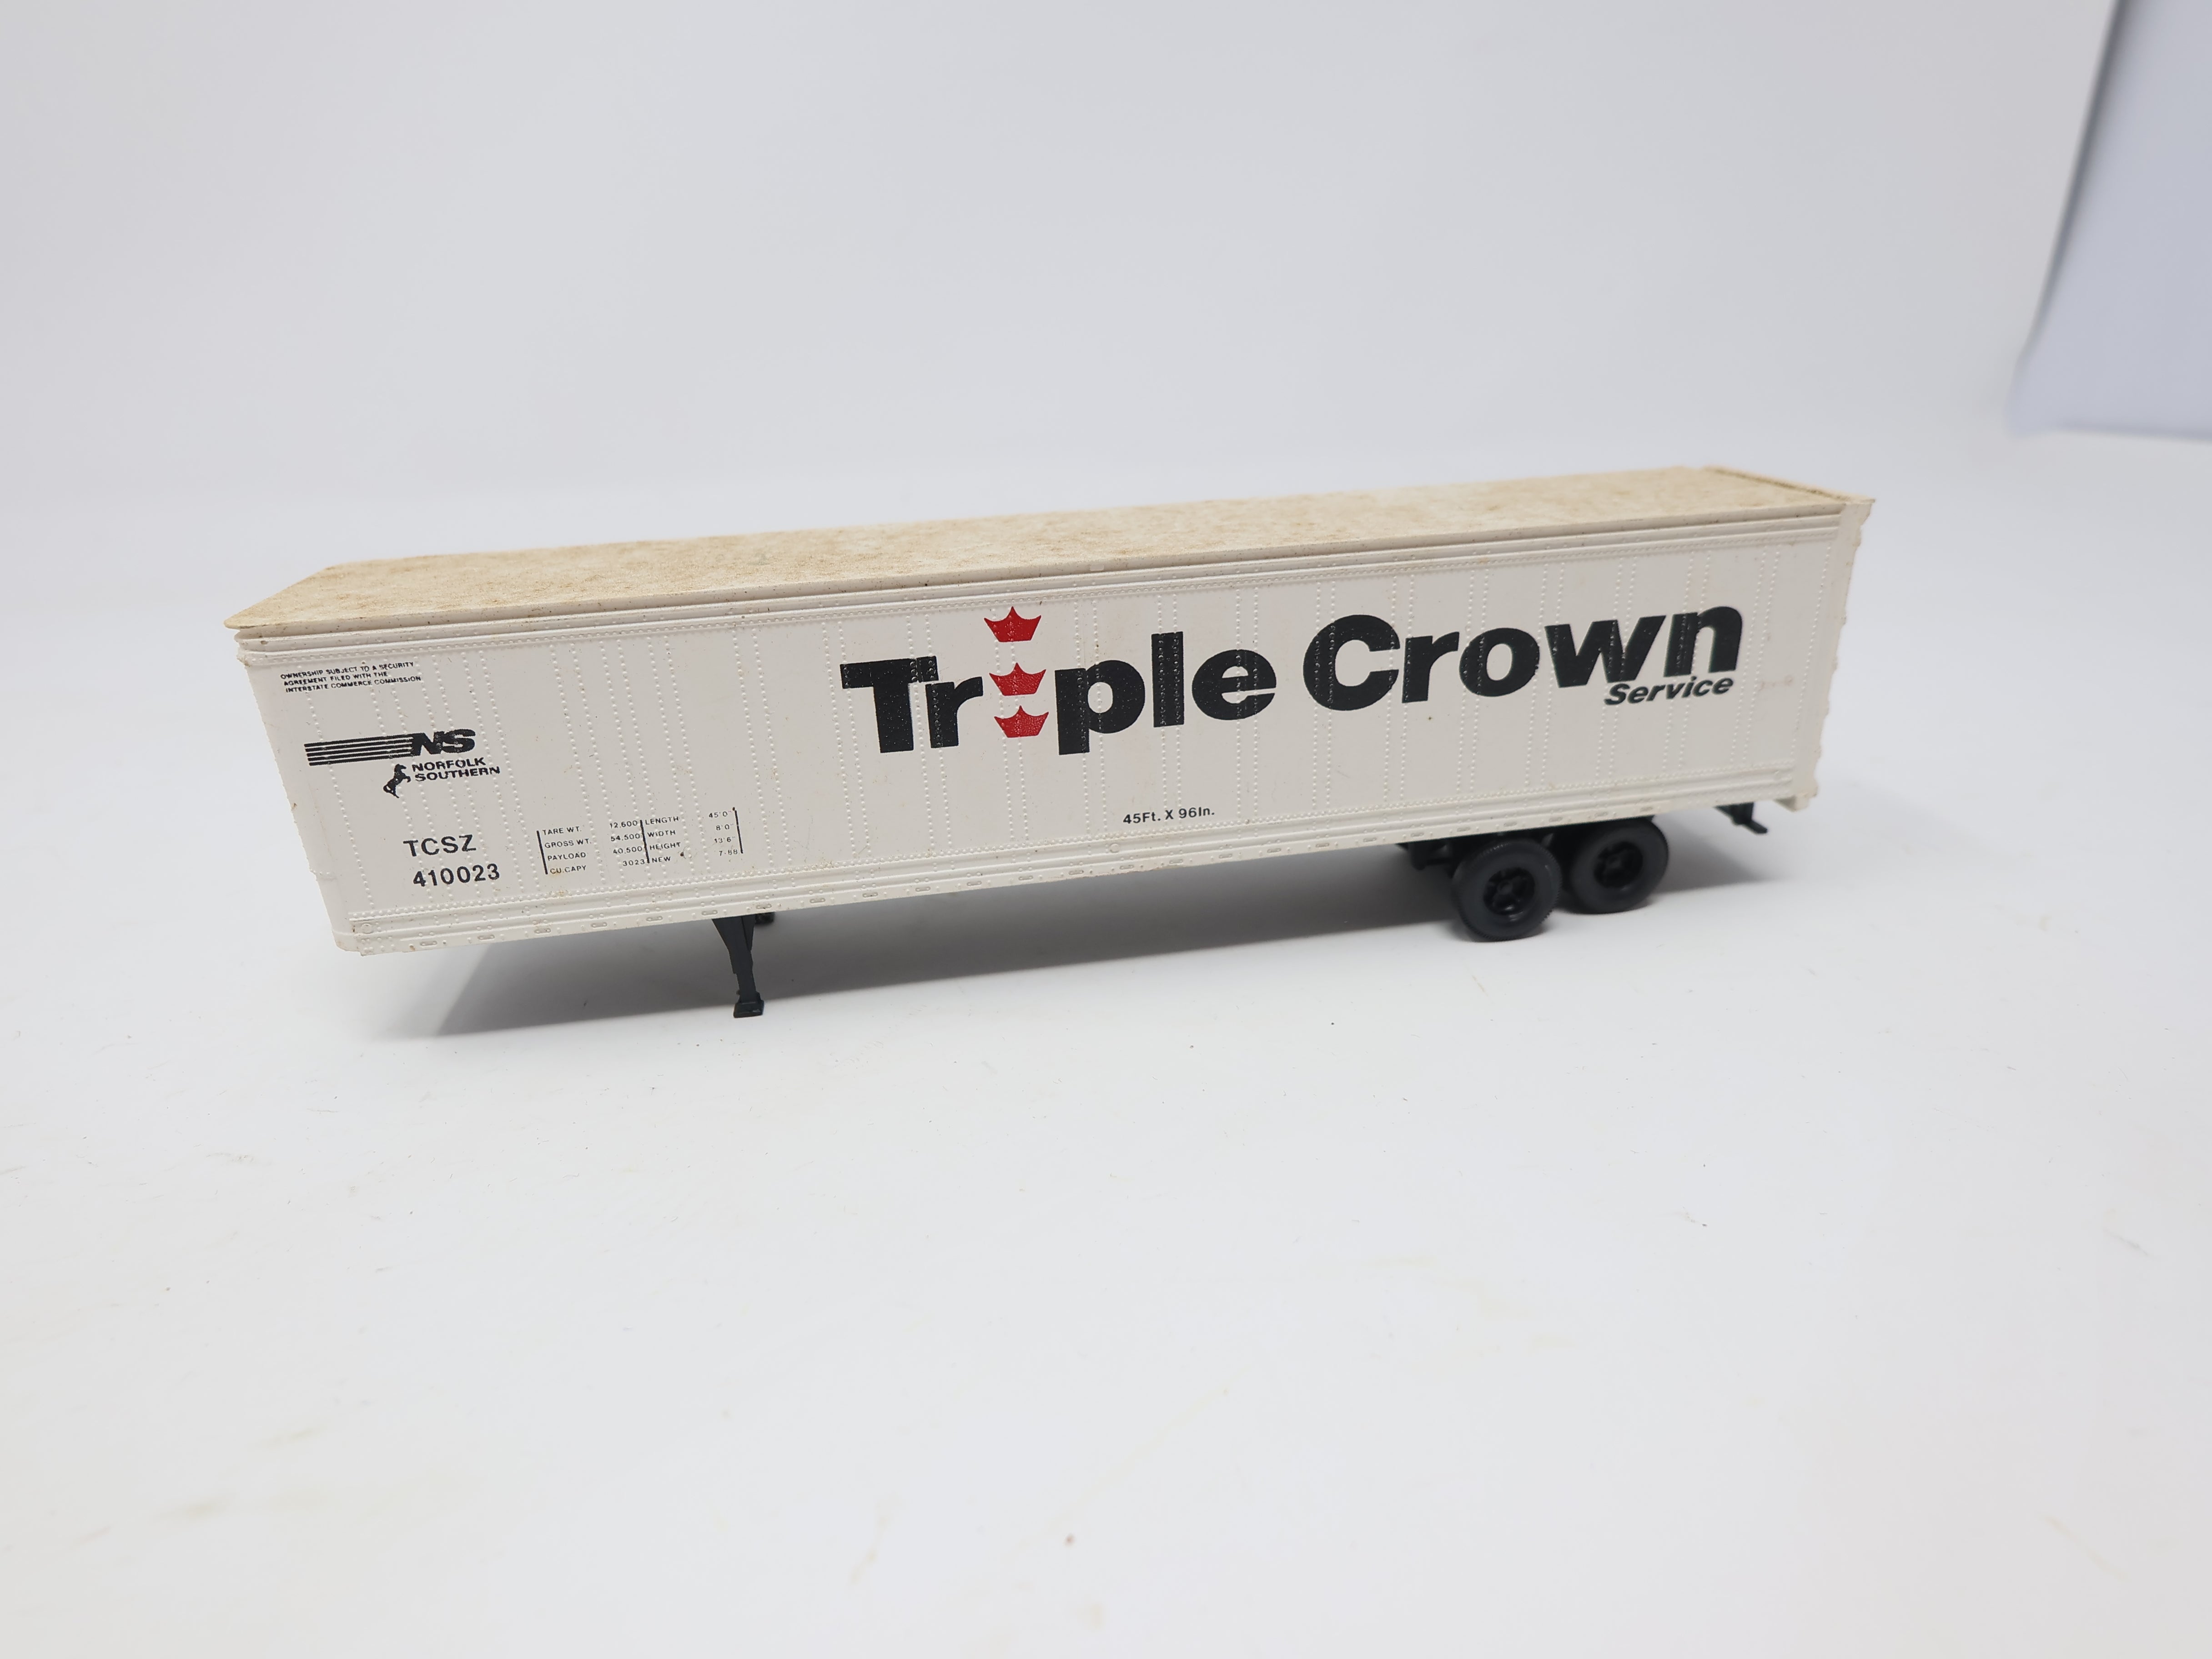 USED , 45' Trailer, Triple Crown Service TCSZ #410023, NS